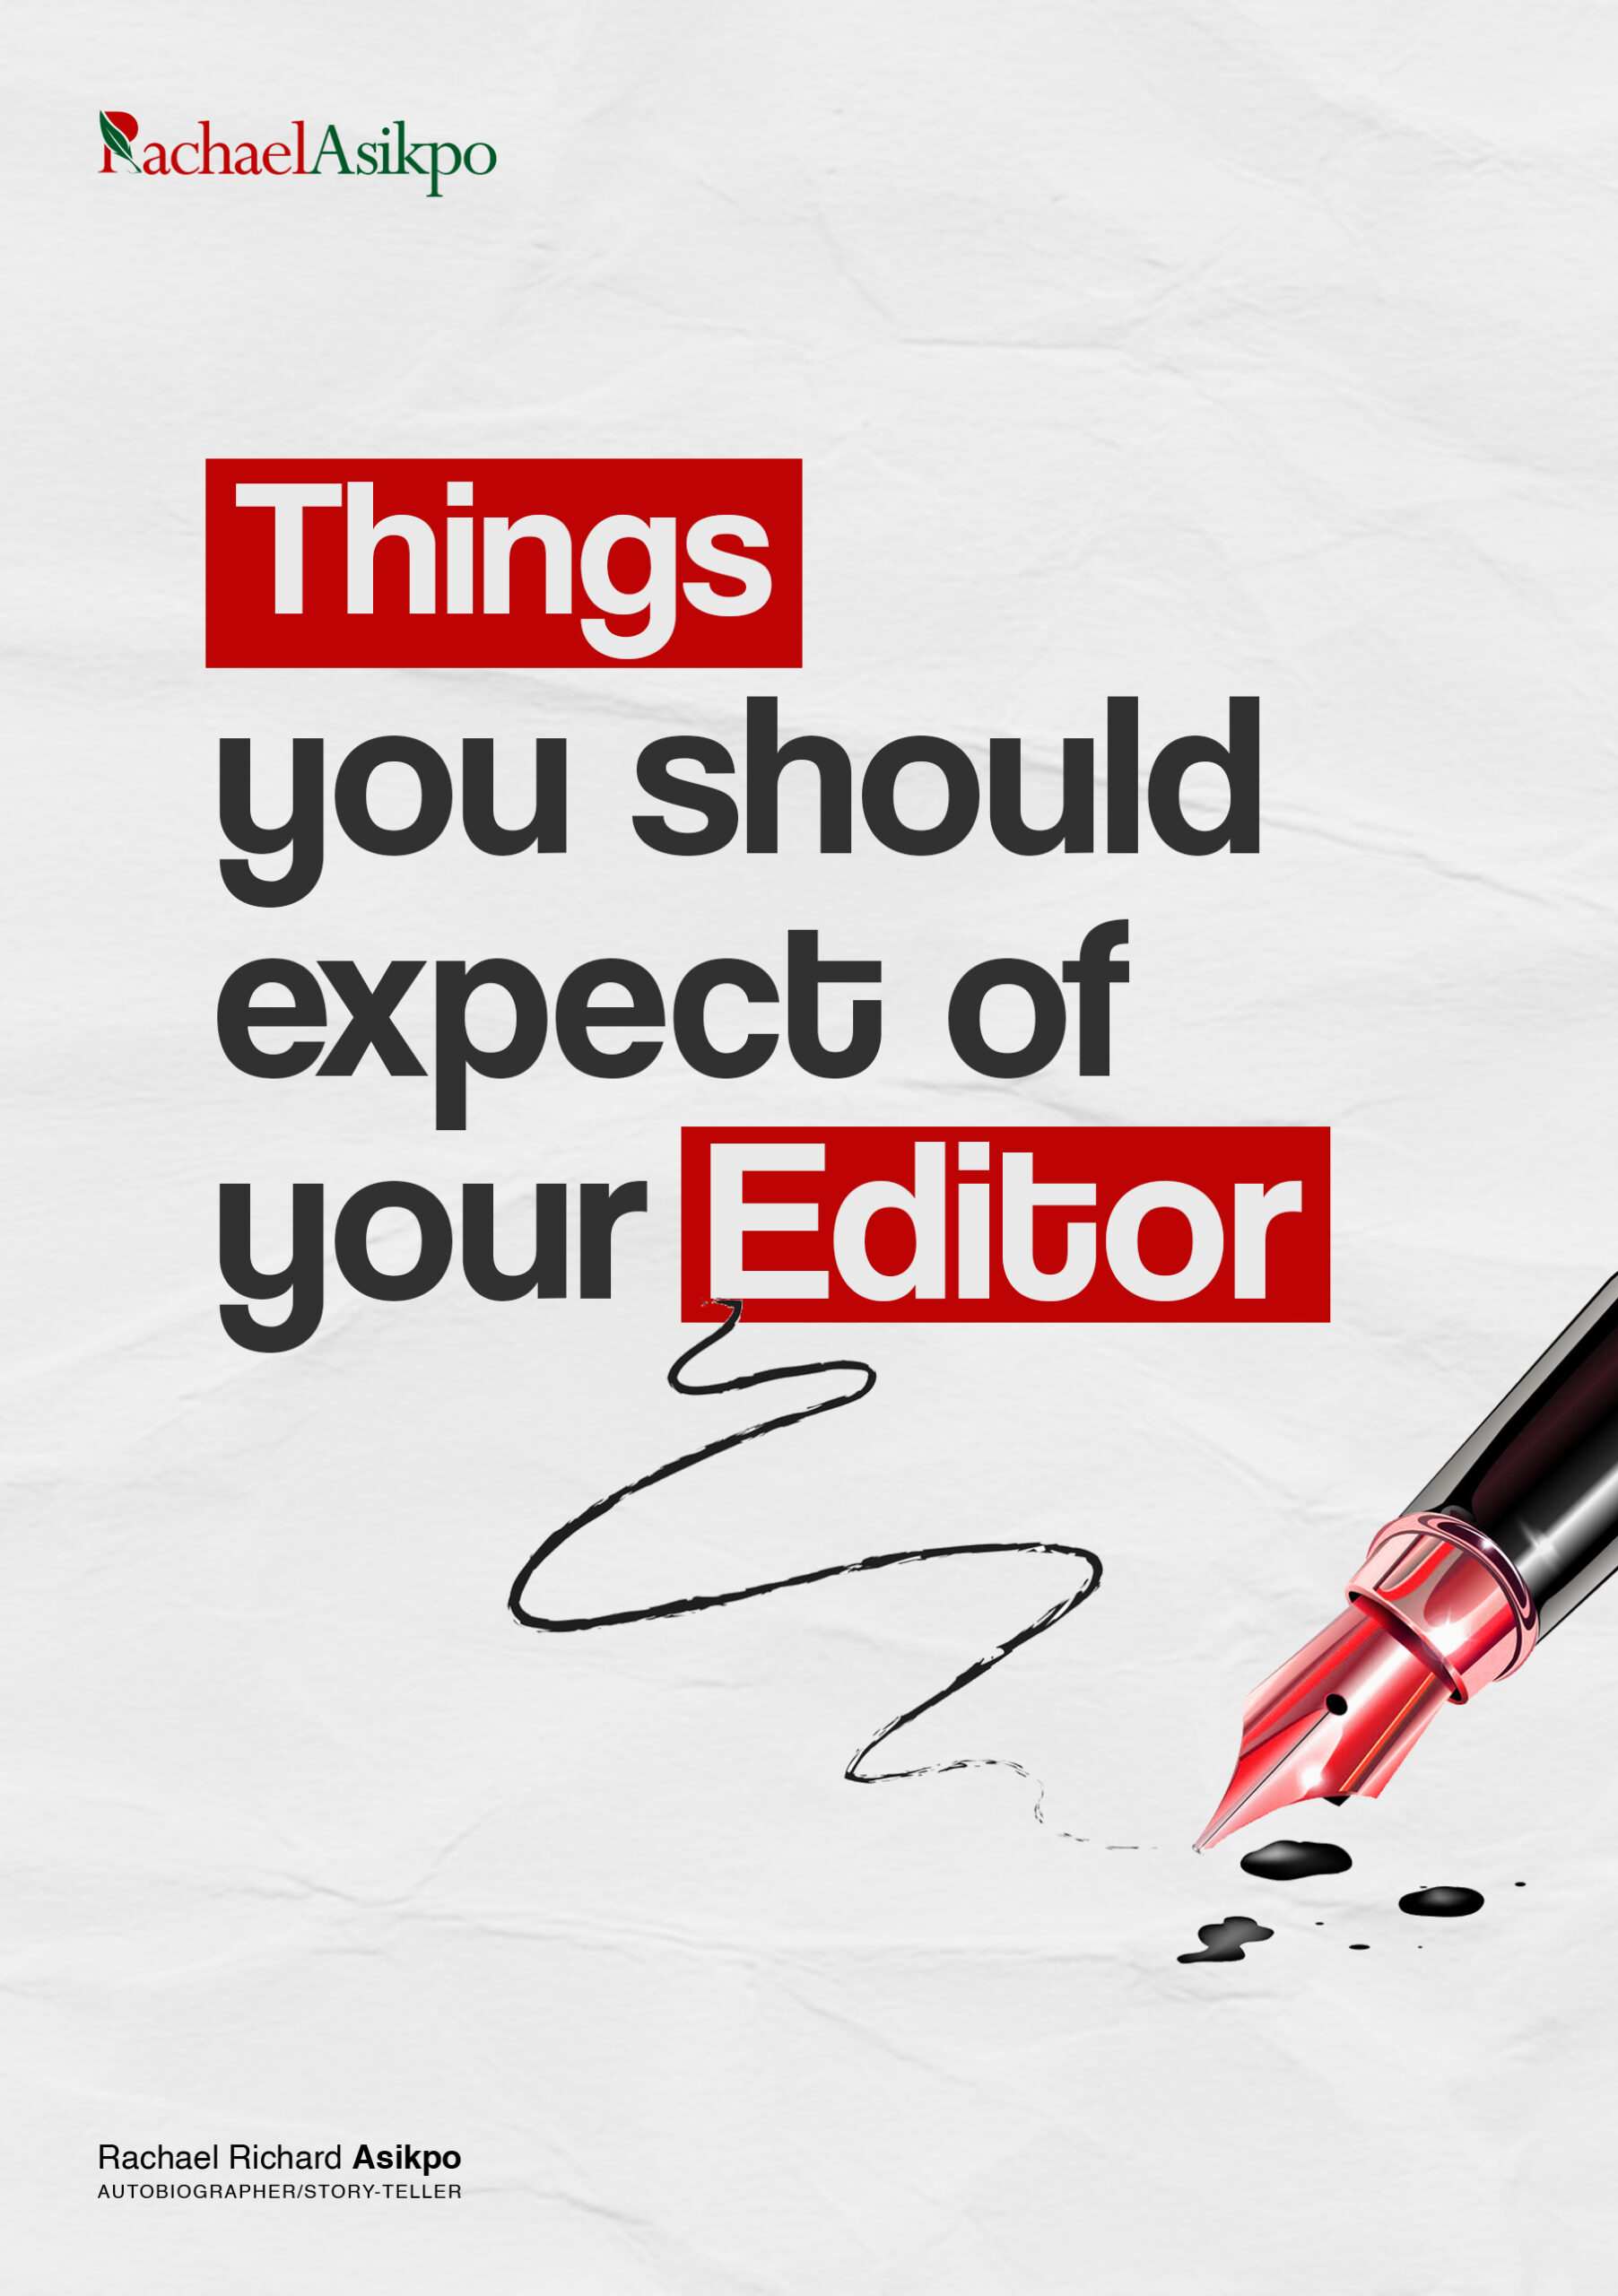 Things required of your Editor